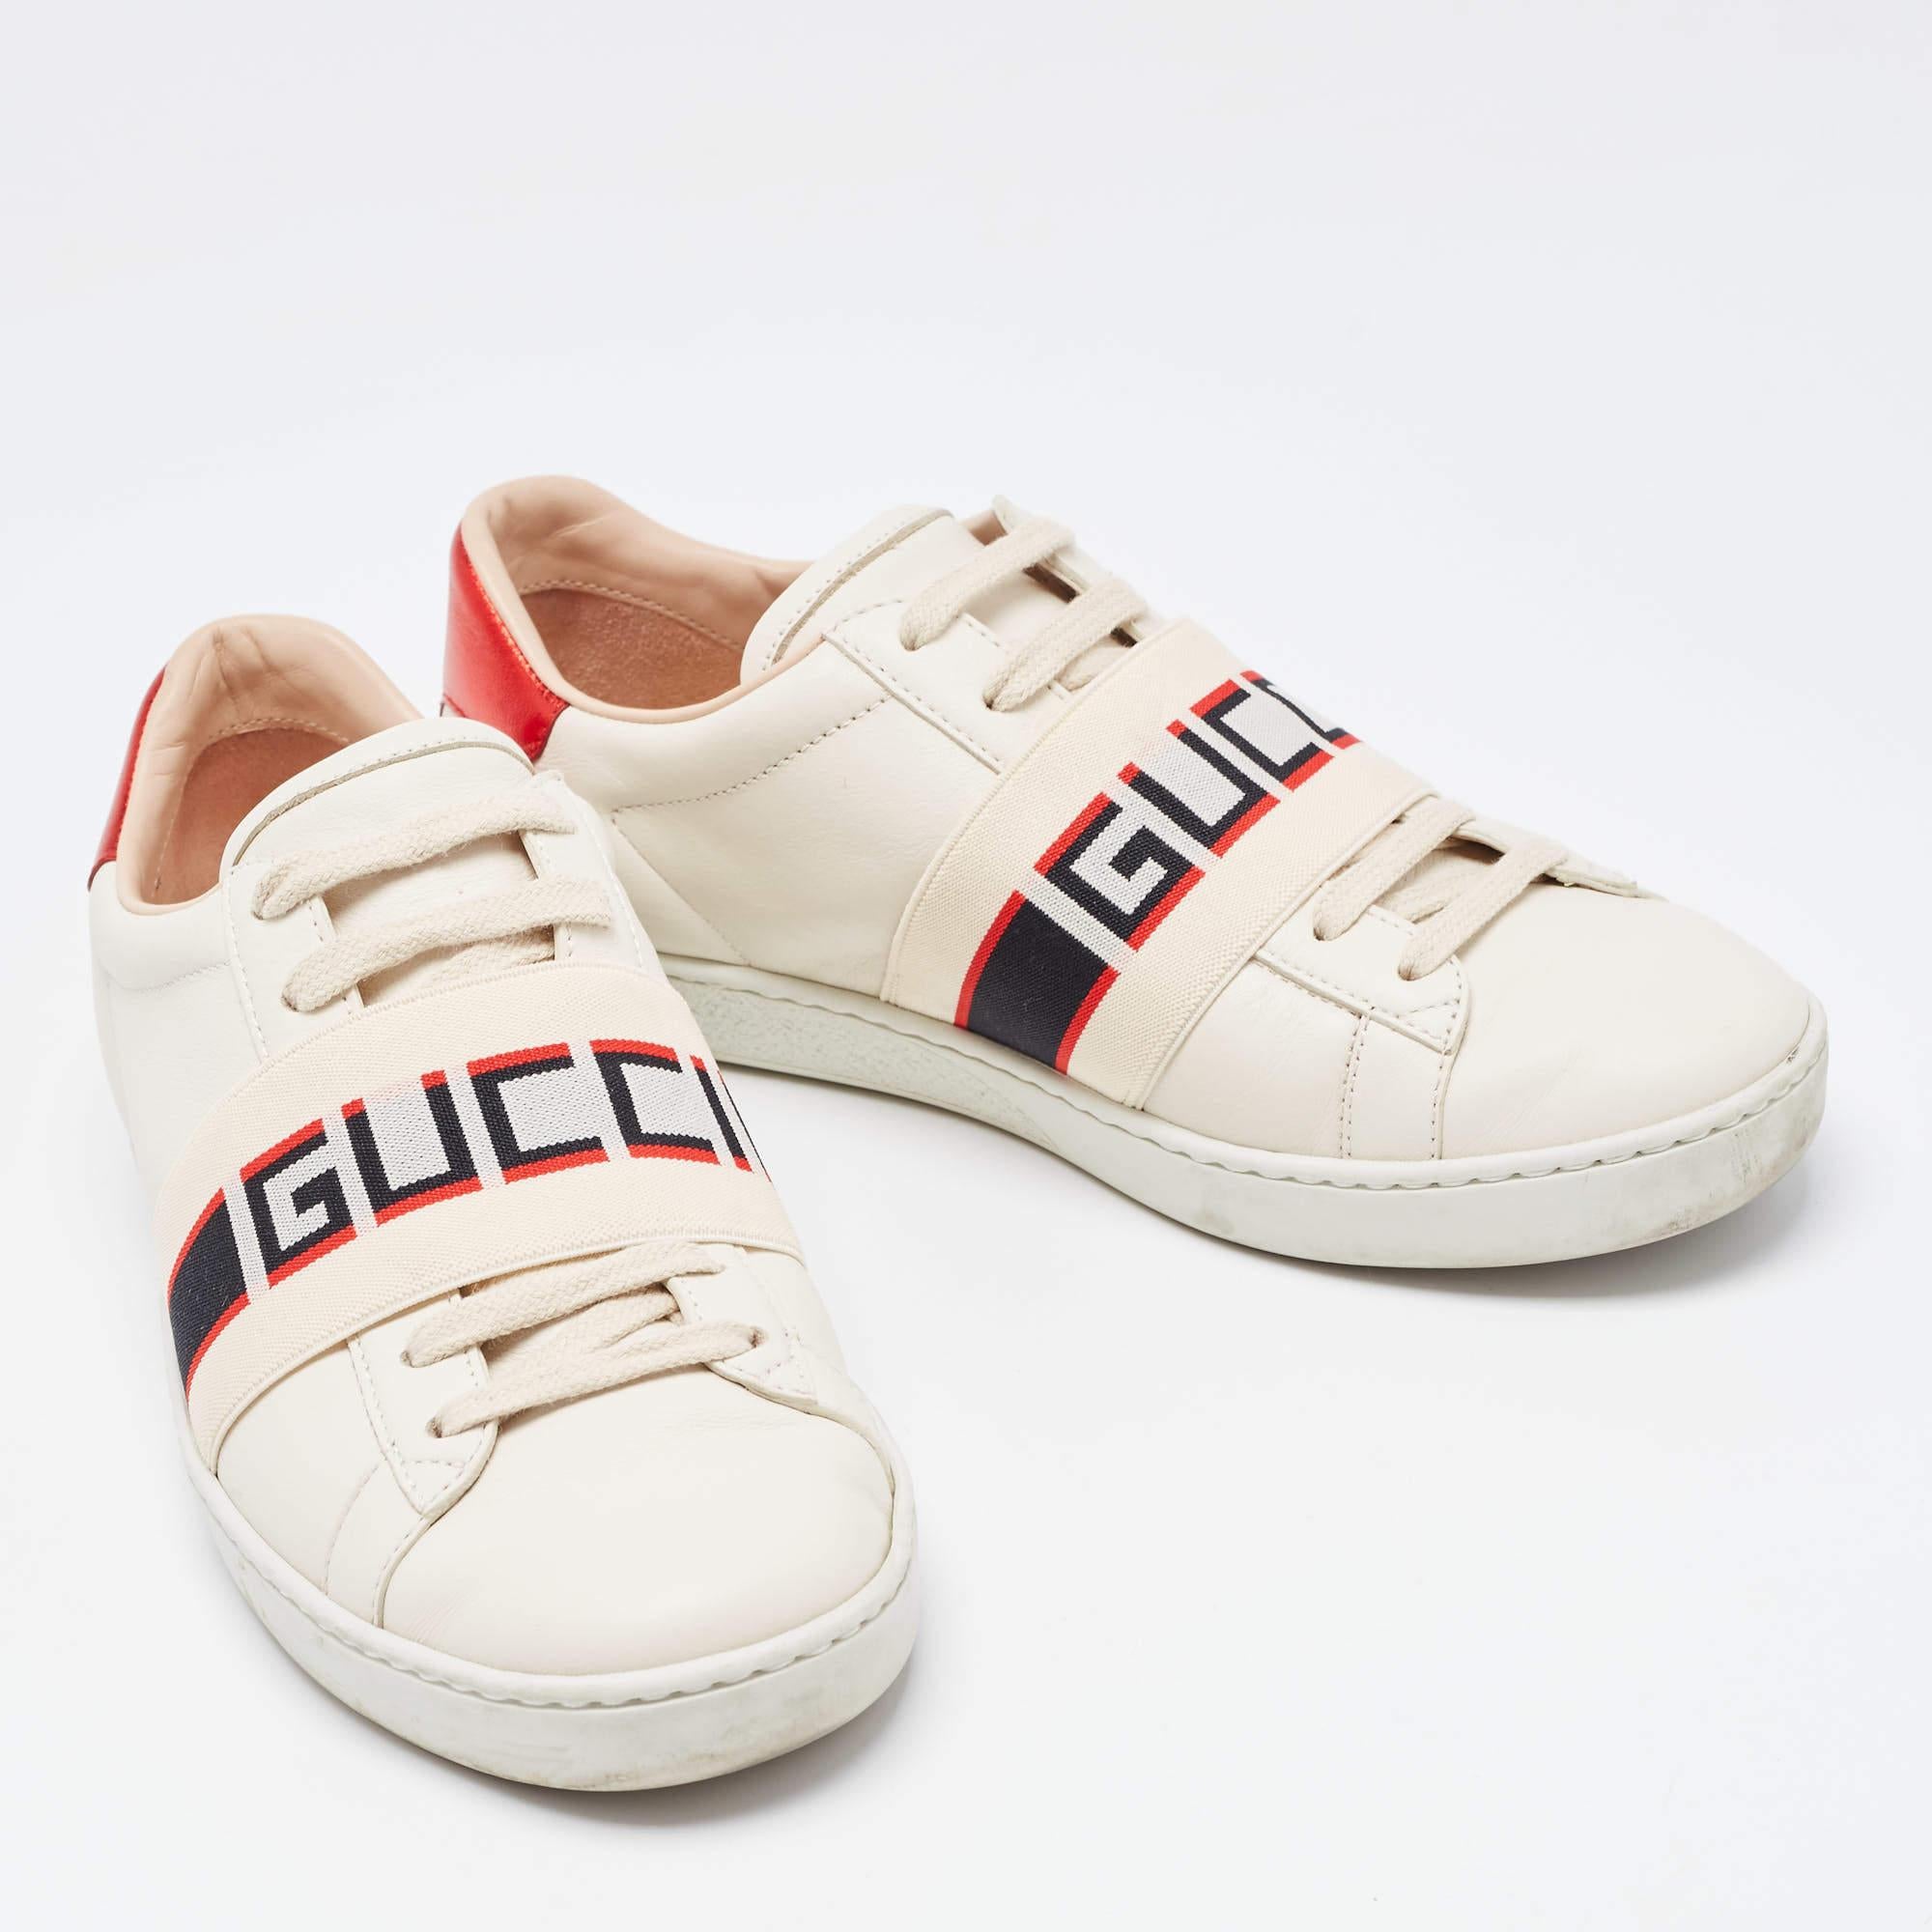 Coming in a classic silhouette, these designer sneakers are a seamless combination of luxury, comfort, and style. These sneakers are designed with signature details and comfortable insoles.

